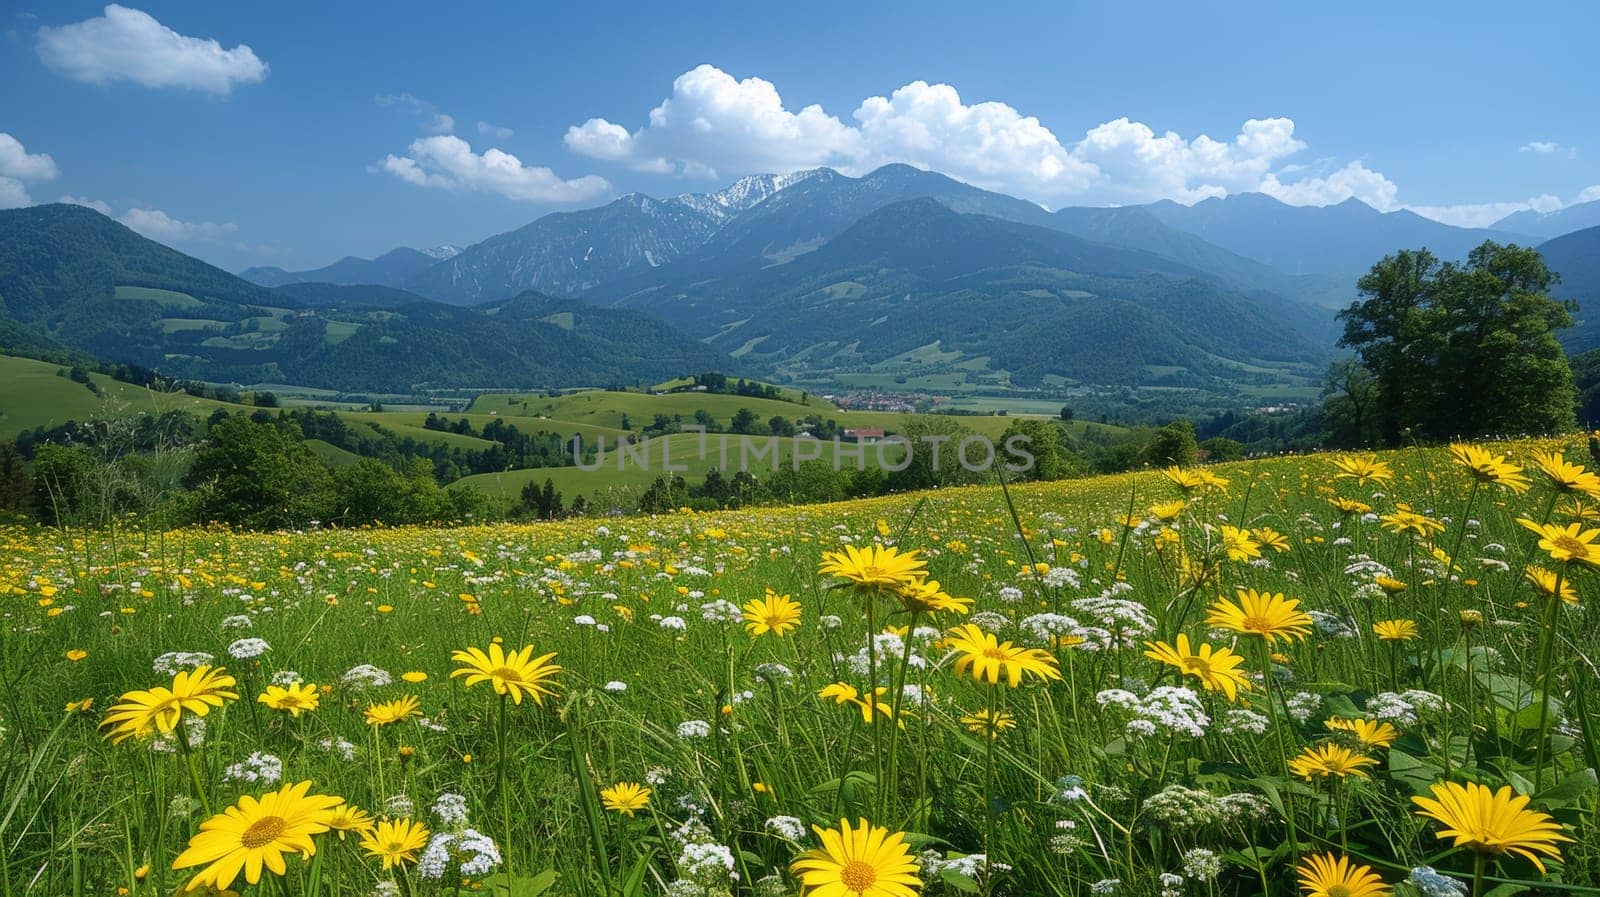 A field of yellow flowers and green grass in a valley